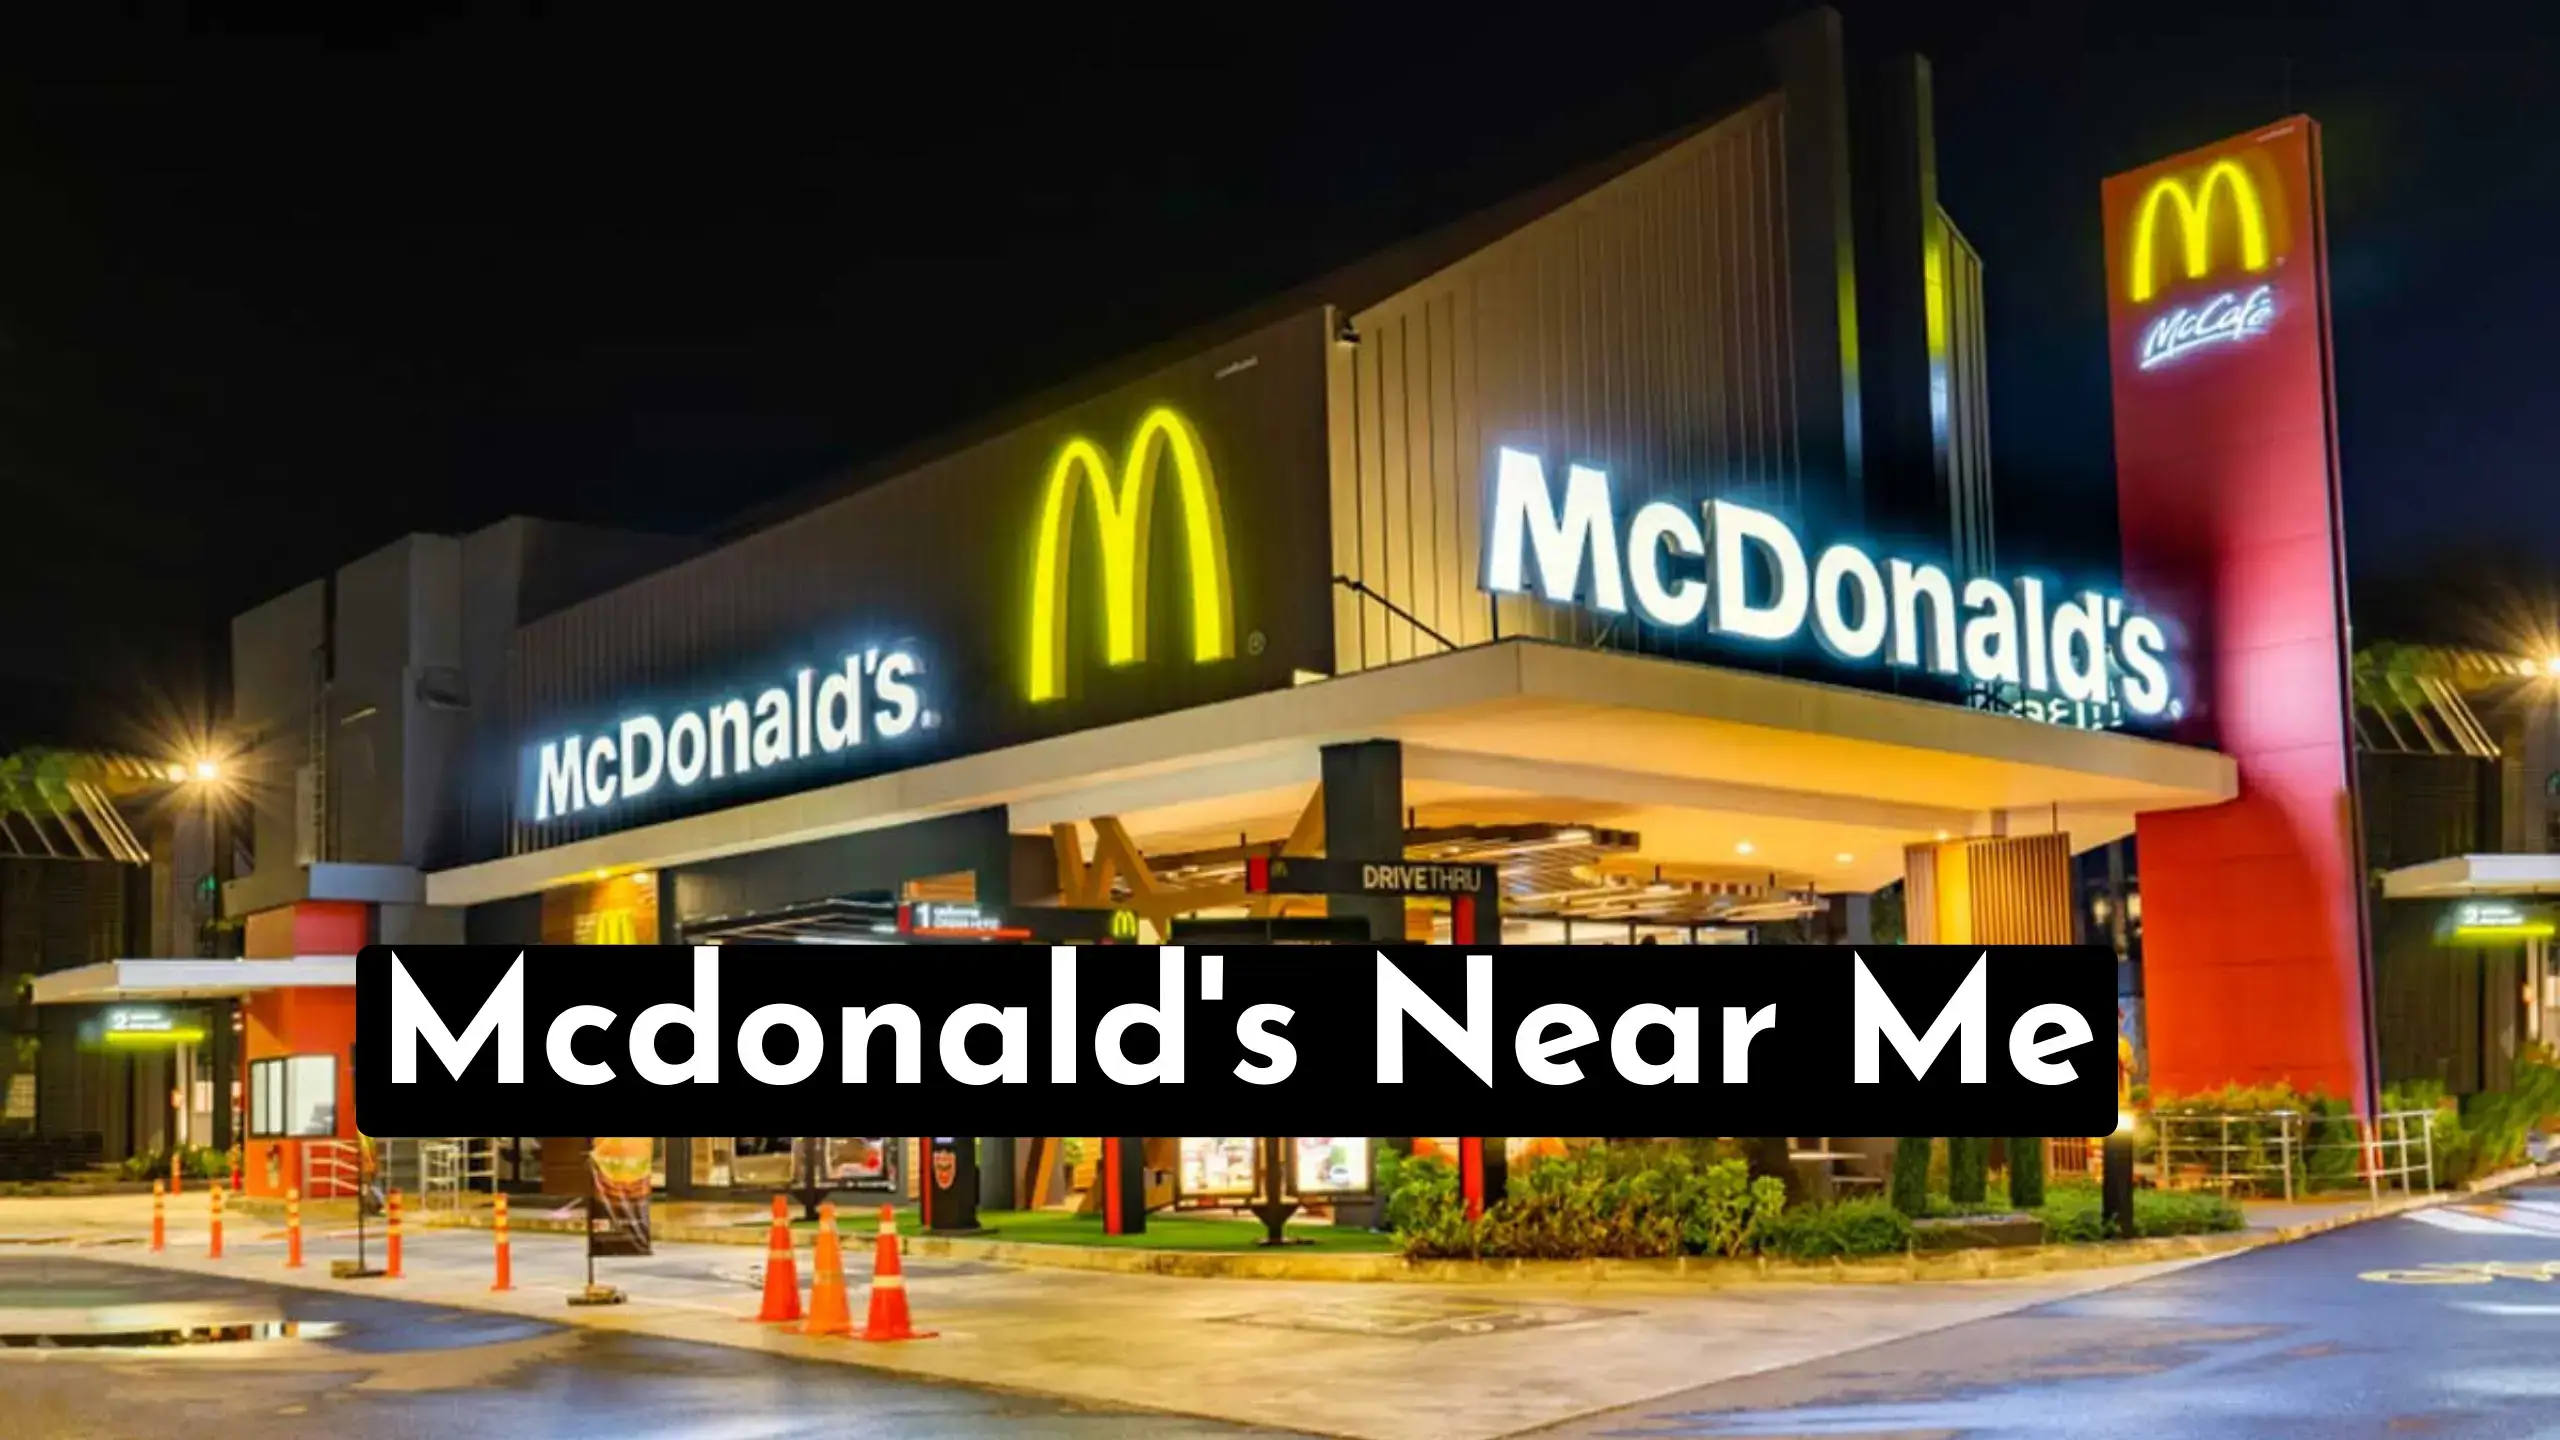 Hungry for McDonald's? Find Mcdonald's Near Me locations in seconds! Our easy-to-use locator will show you all the nearest McDonald's Locations.